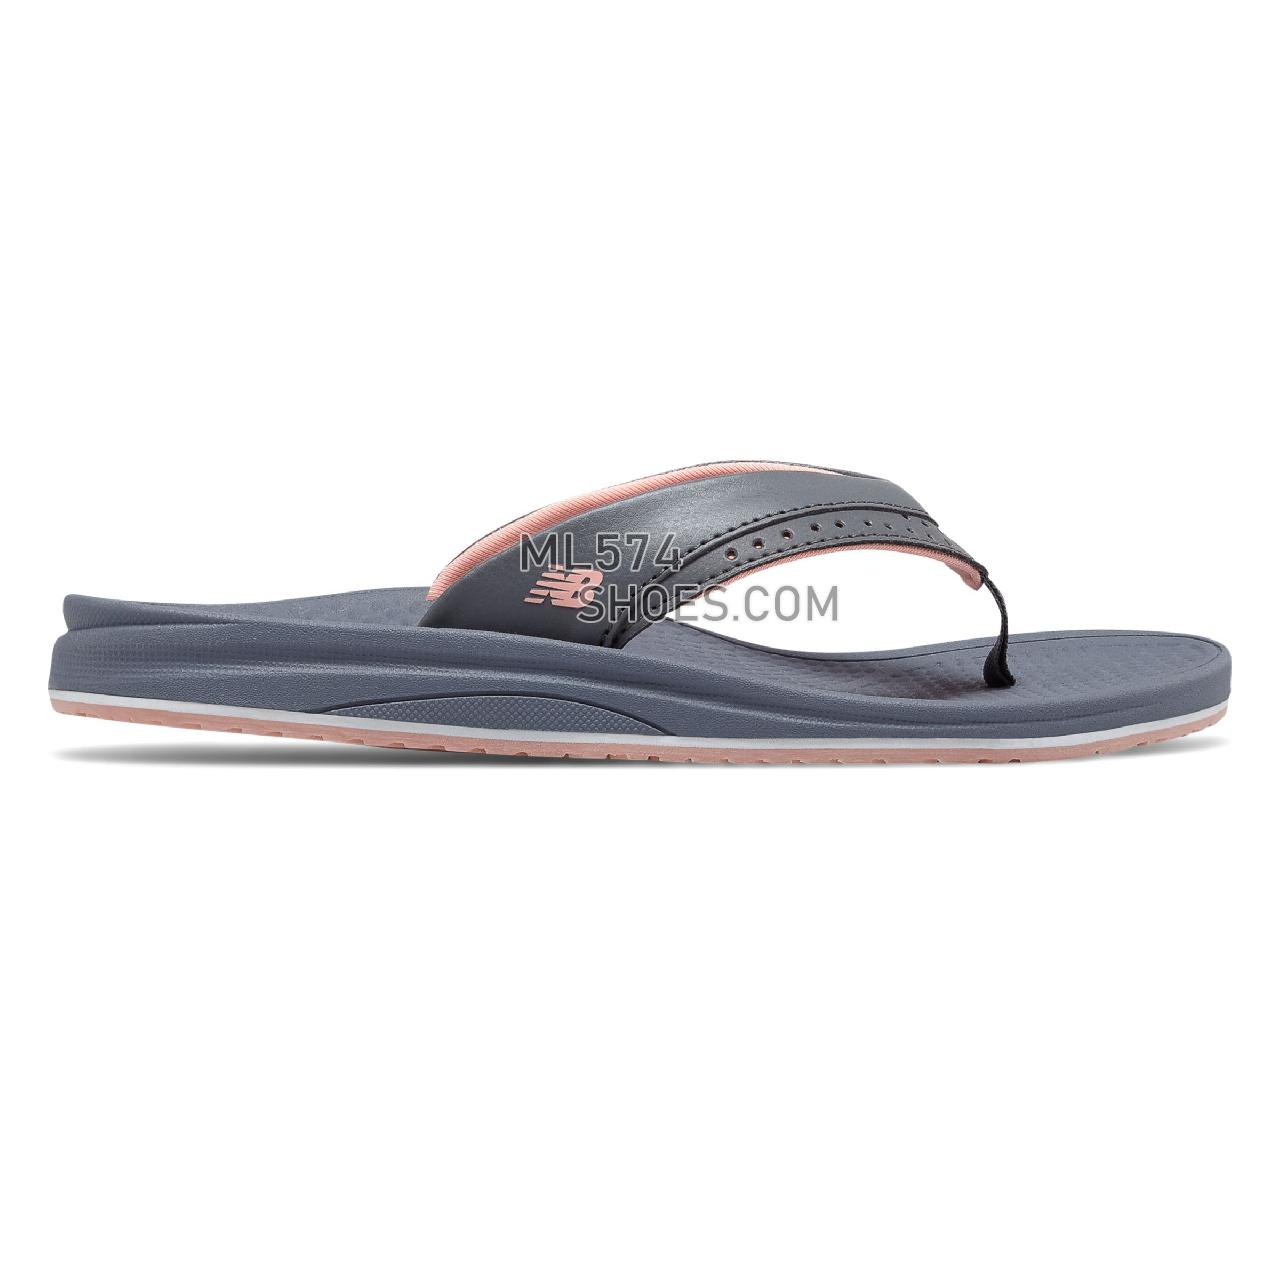 New Balance Renew Thong - Women's 6086 - Sandals Grey with Pink - W6086GRP